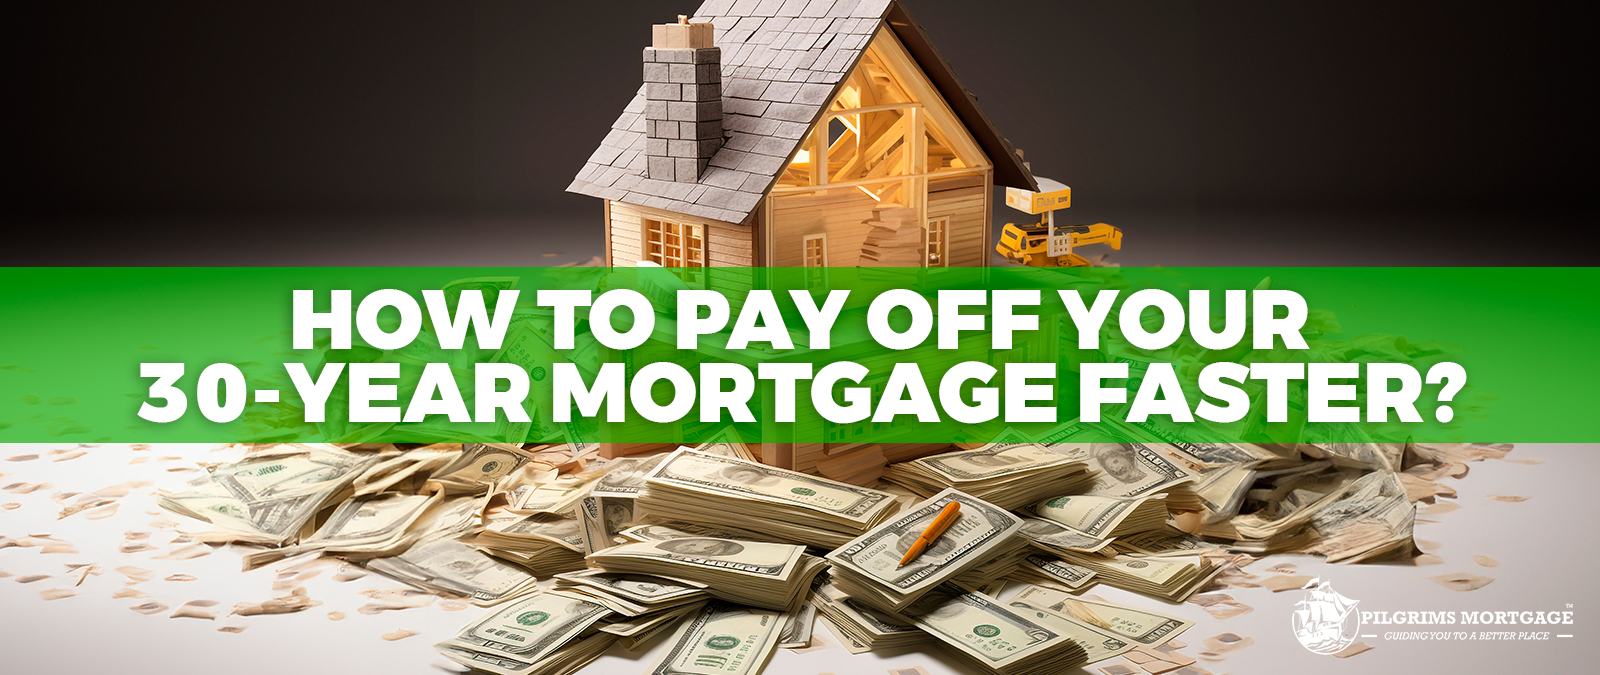 How to Pay Off Your 30-Year Mortgage Faster?